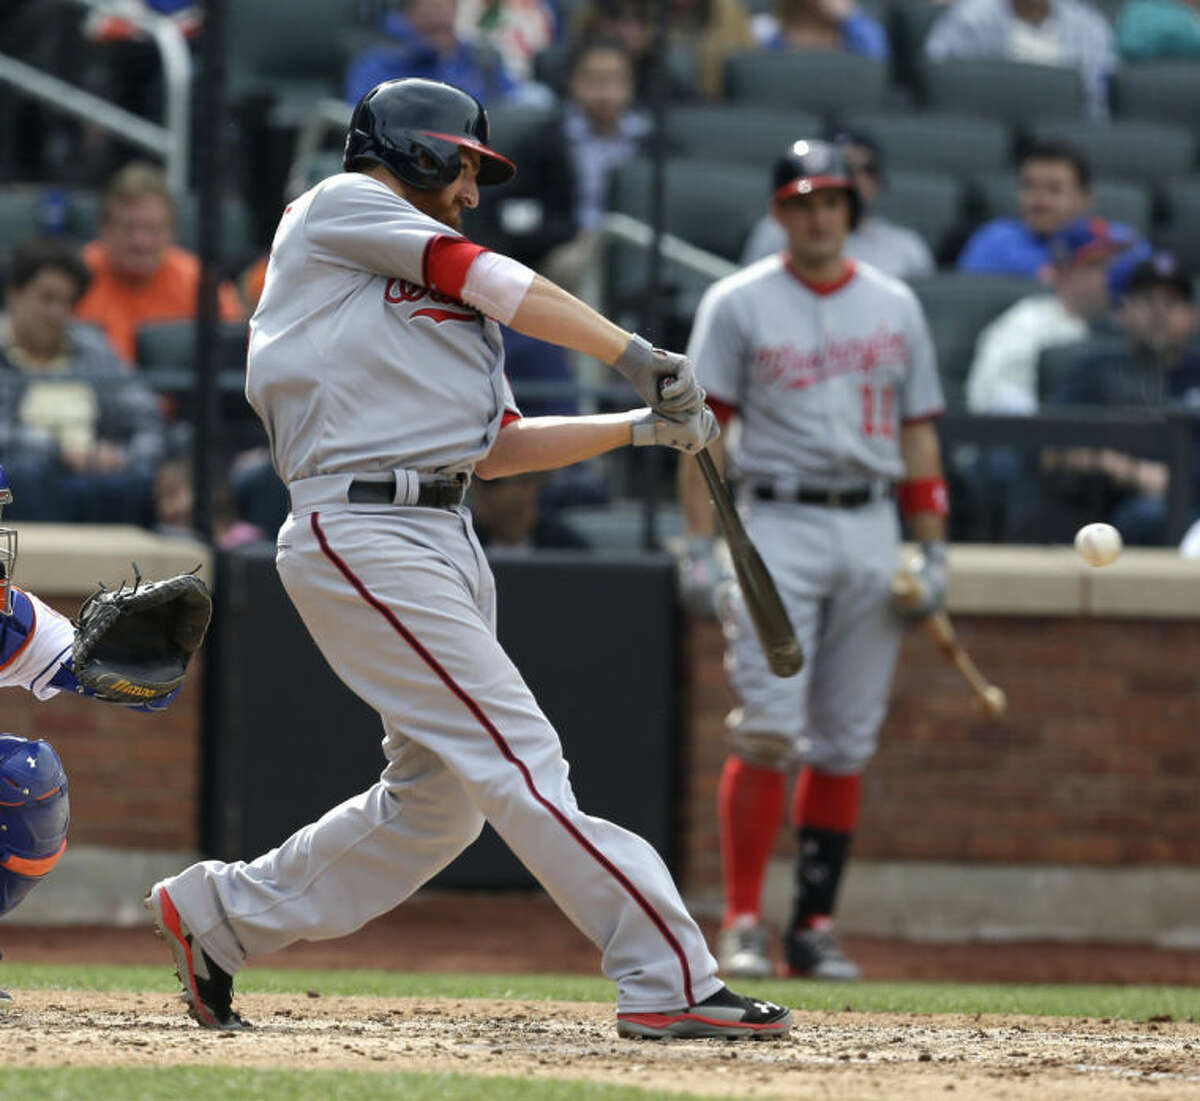 Washington Nationals' Adam LaRoche hits a two-run RBI single during the seventh inning of the baseball game against the New York Mets at Citi Field, Thursday, April 3, 2014 in New York. (AP Photo/Seth Wenig)